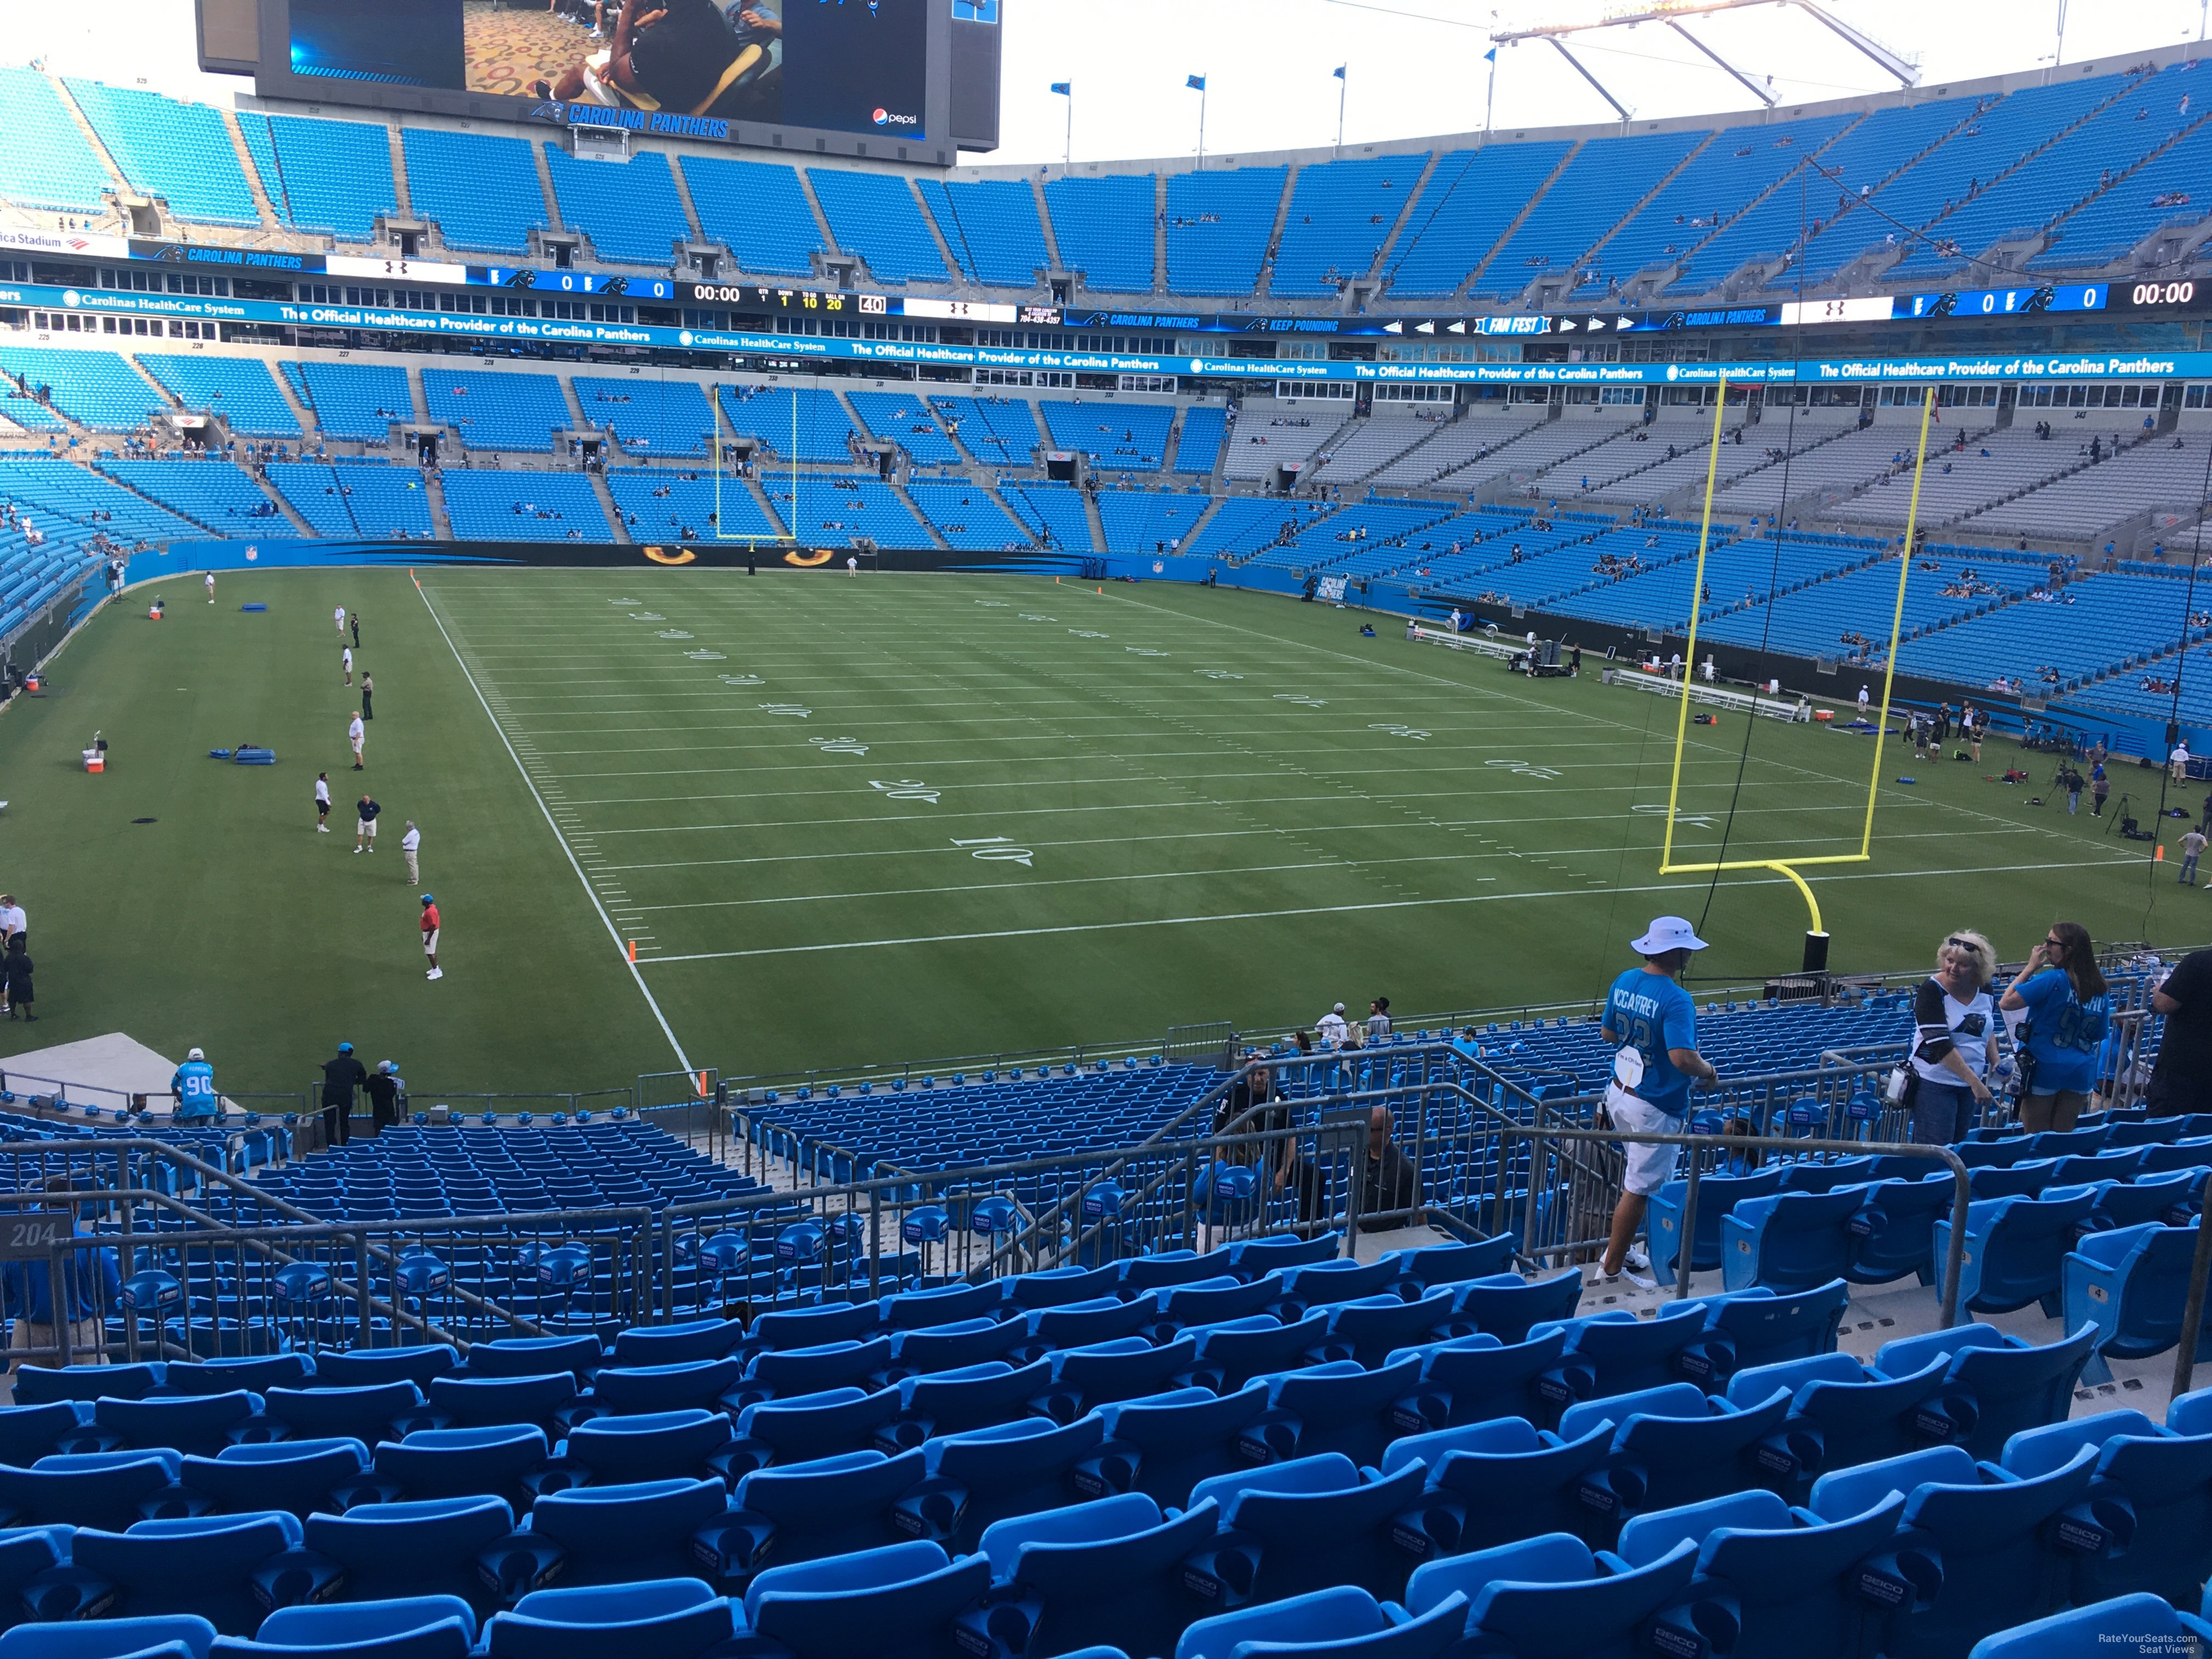 section 204, row 10 seat view  for football - bank of america stadium